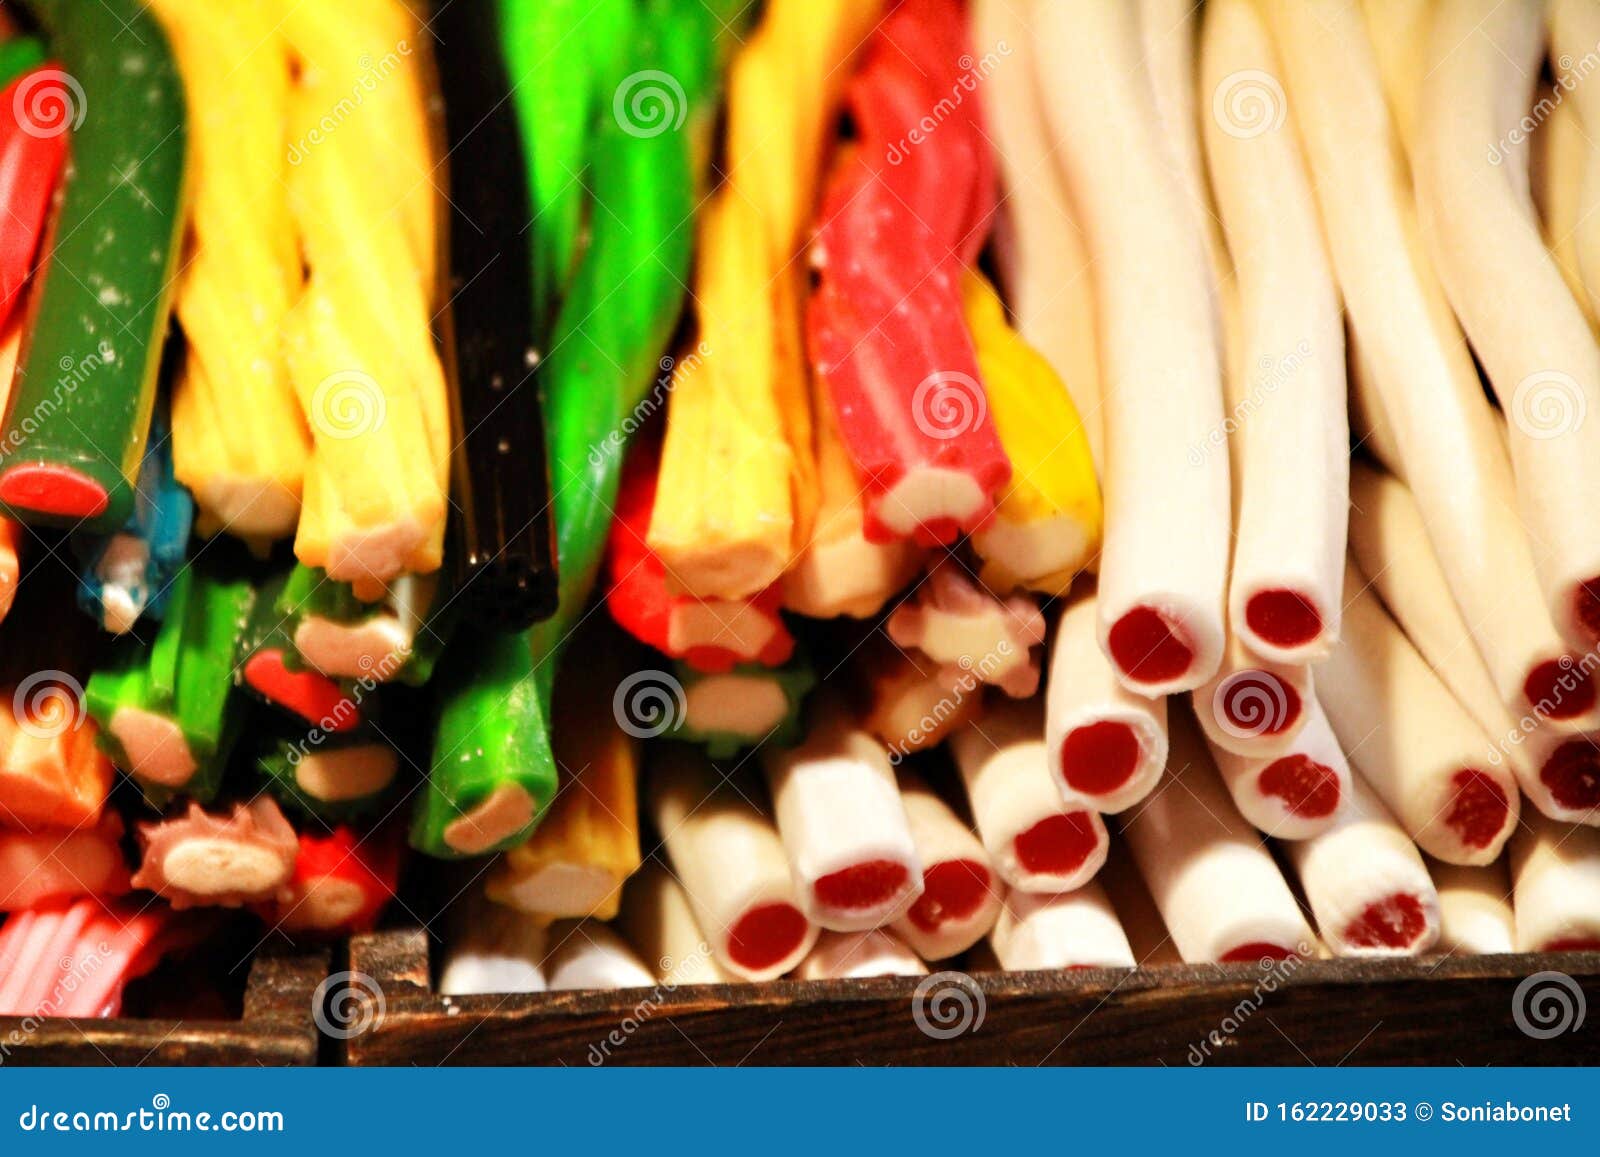 candies of various colors and flavors in a street stall